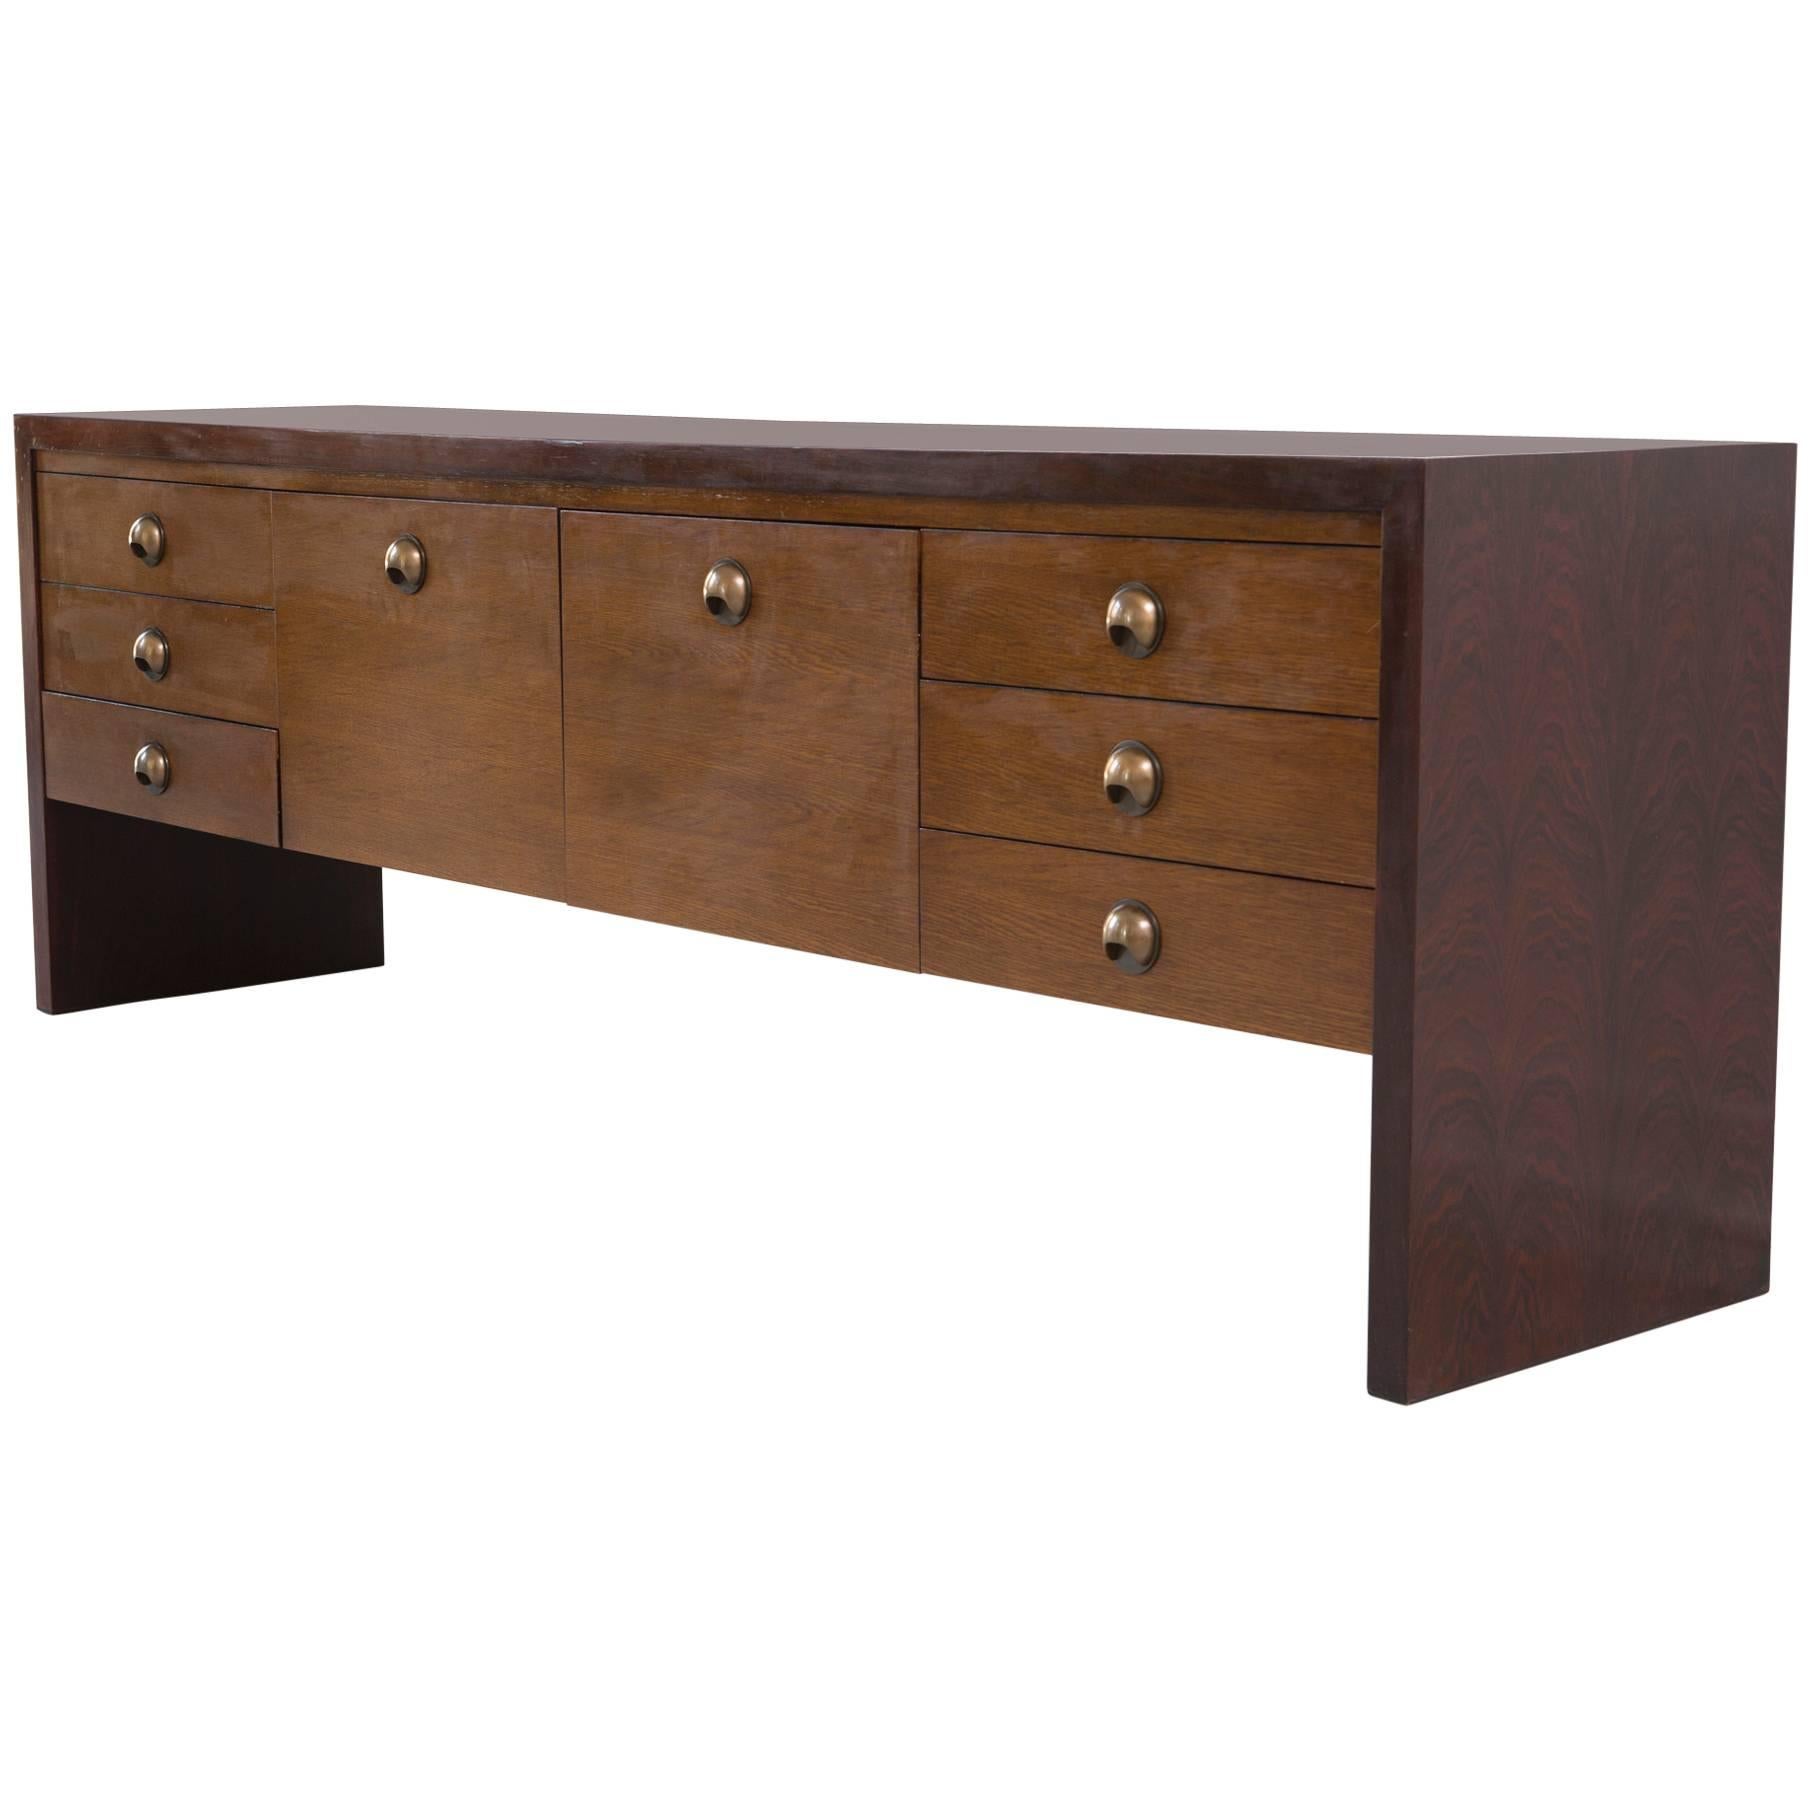 Dunbar Credenza in Rosewood and Walnut